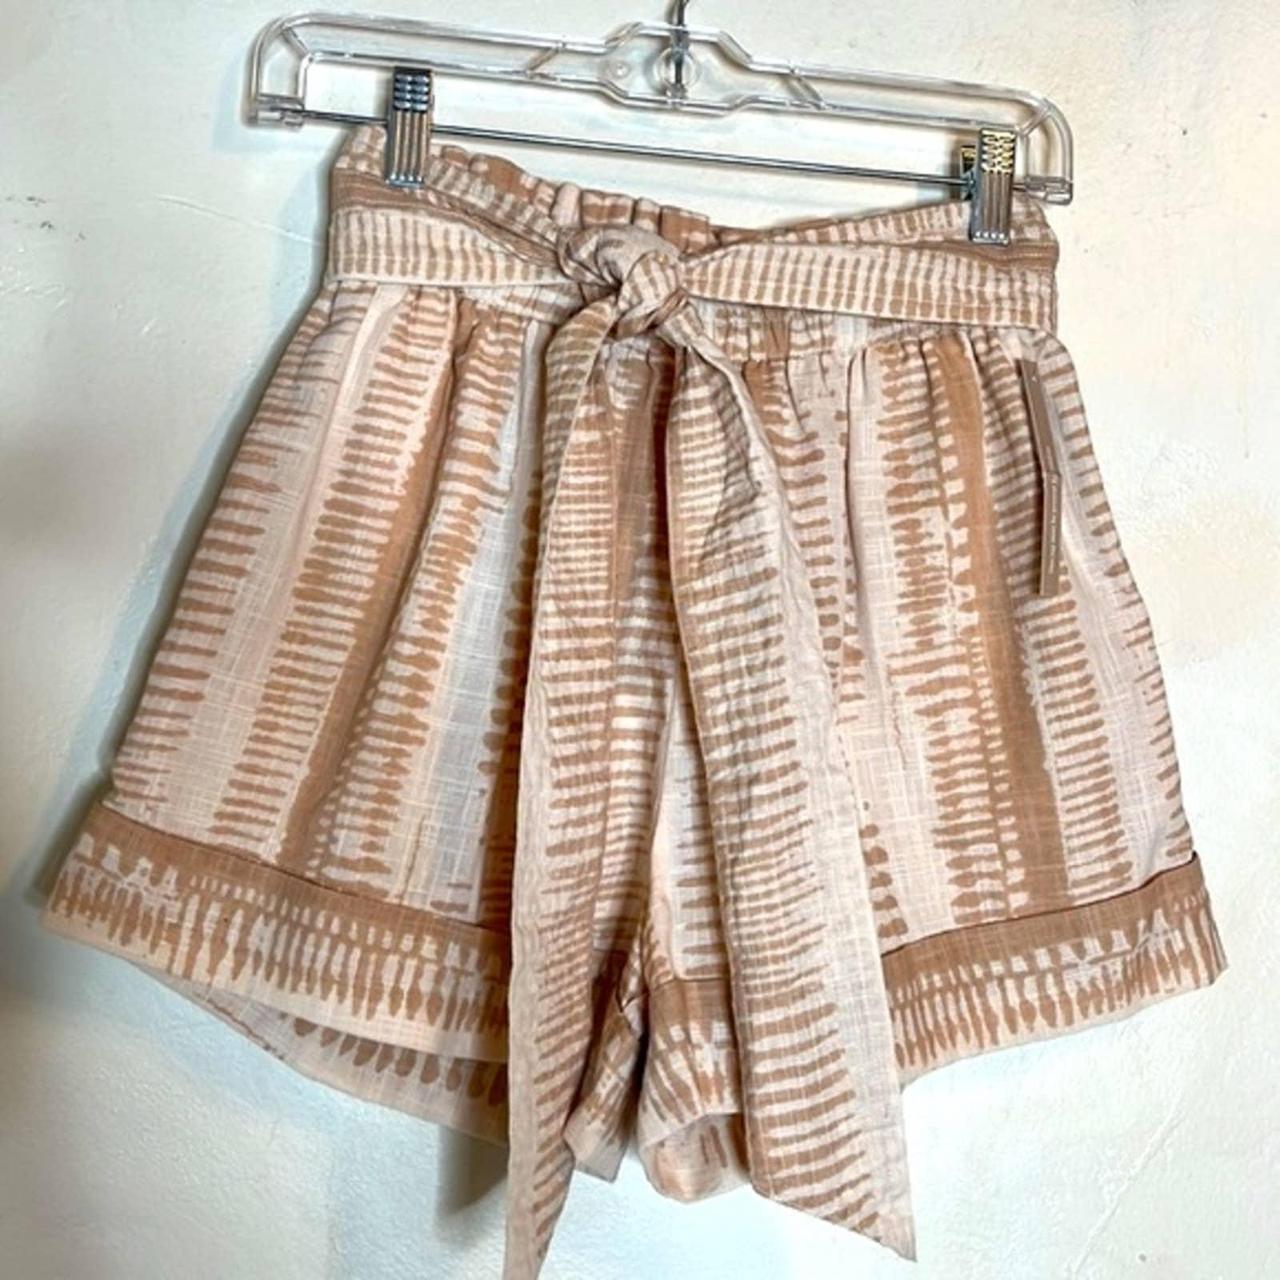 Product Image 1 - NWT Cleobella shorts
Pinky peach paperbag